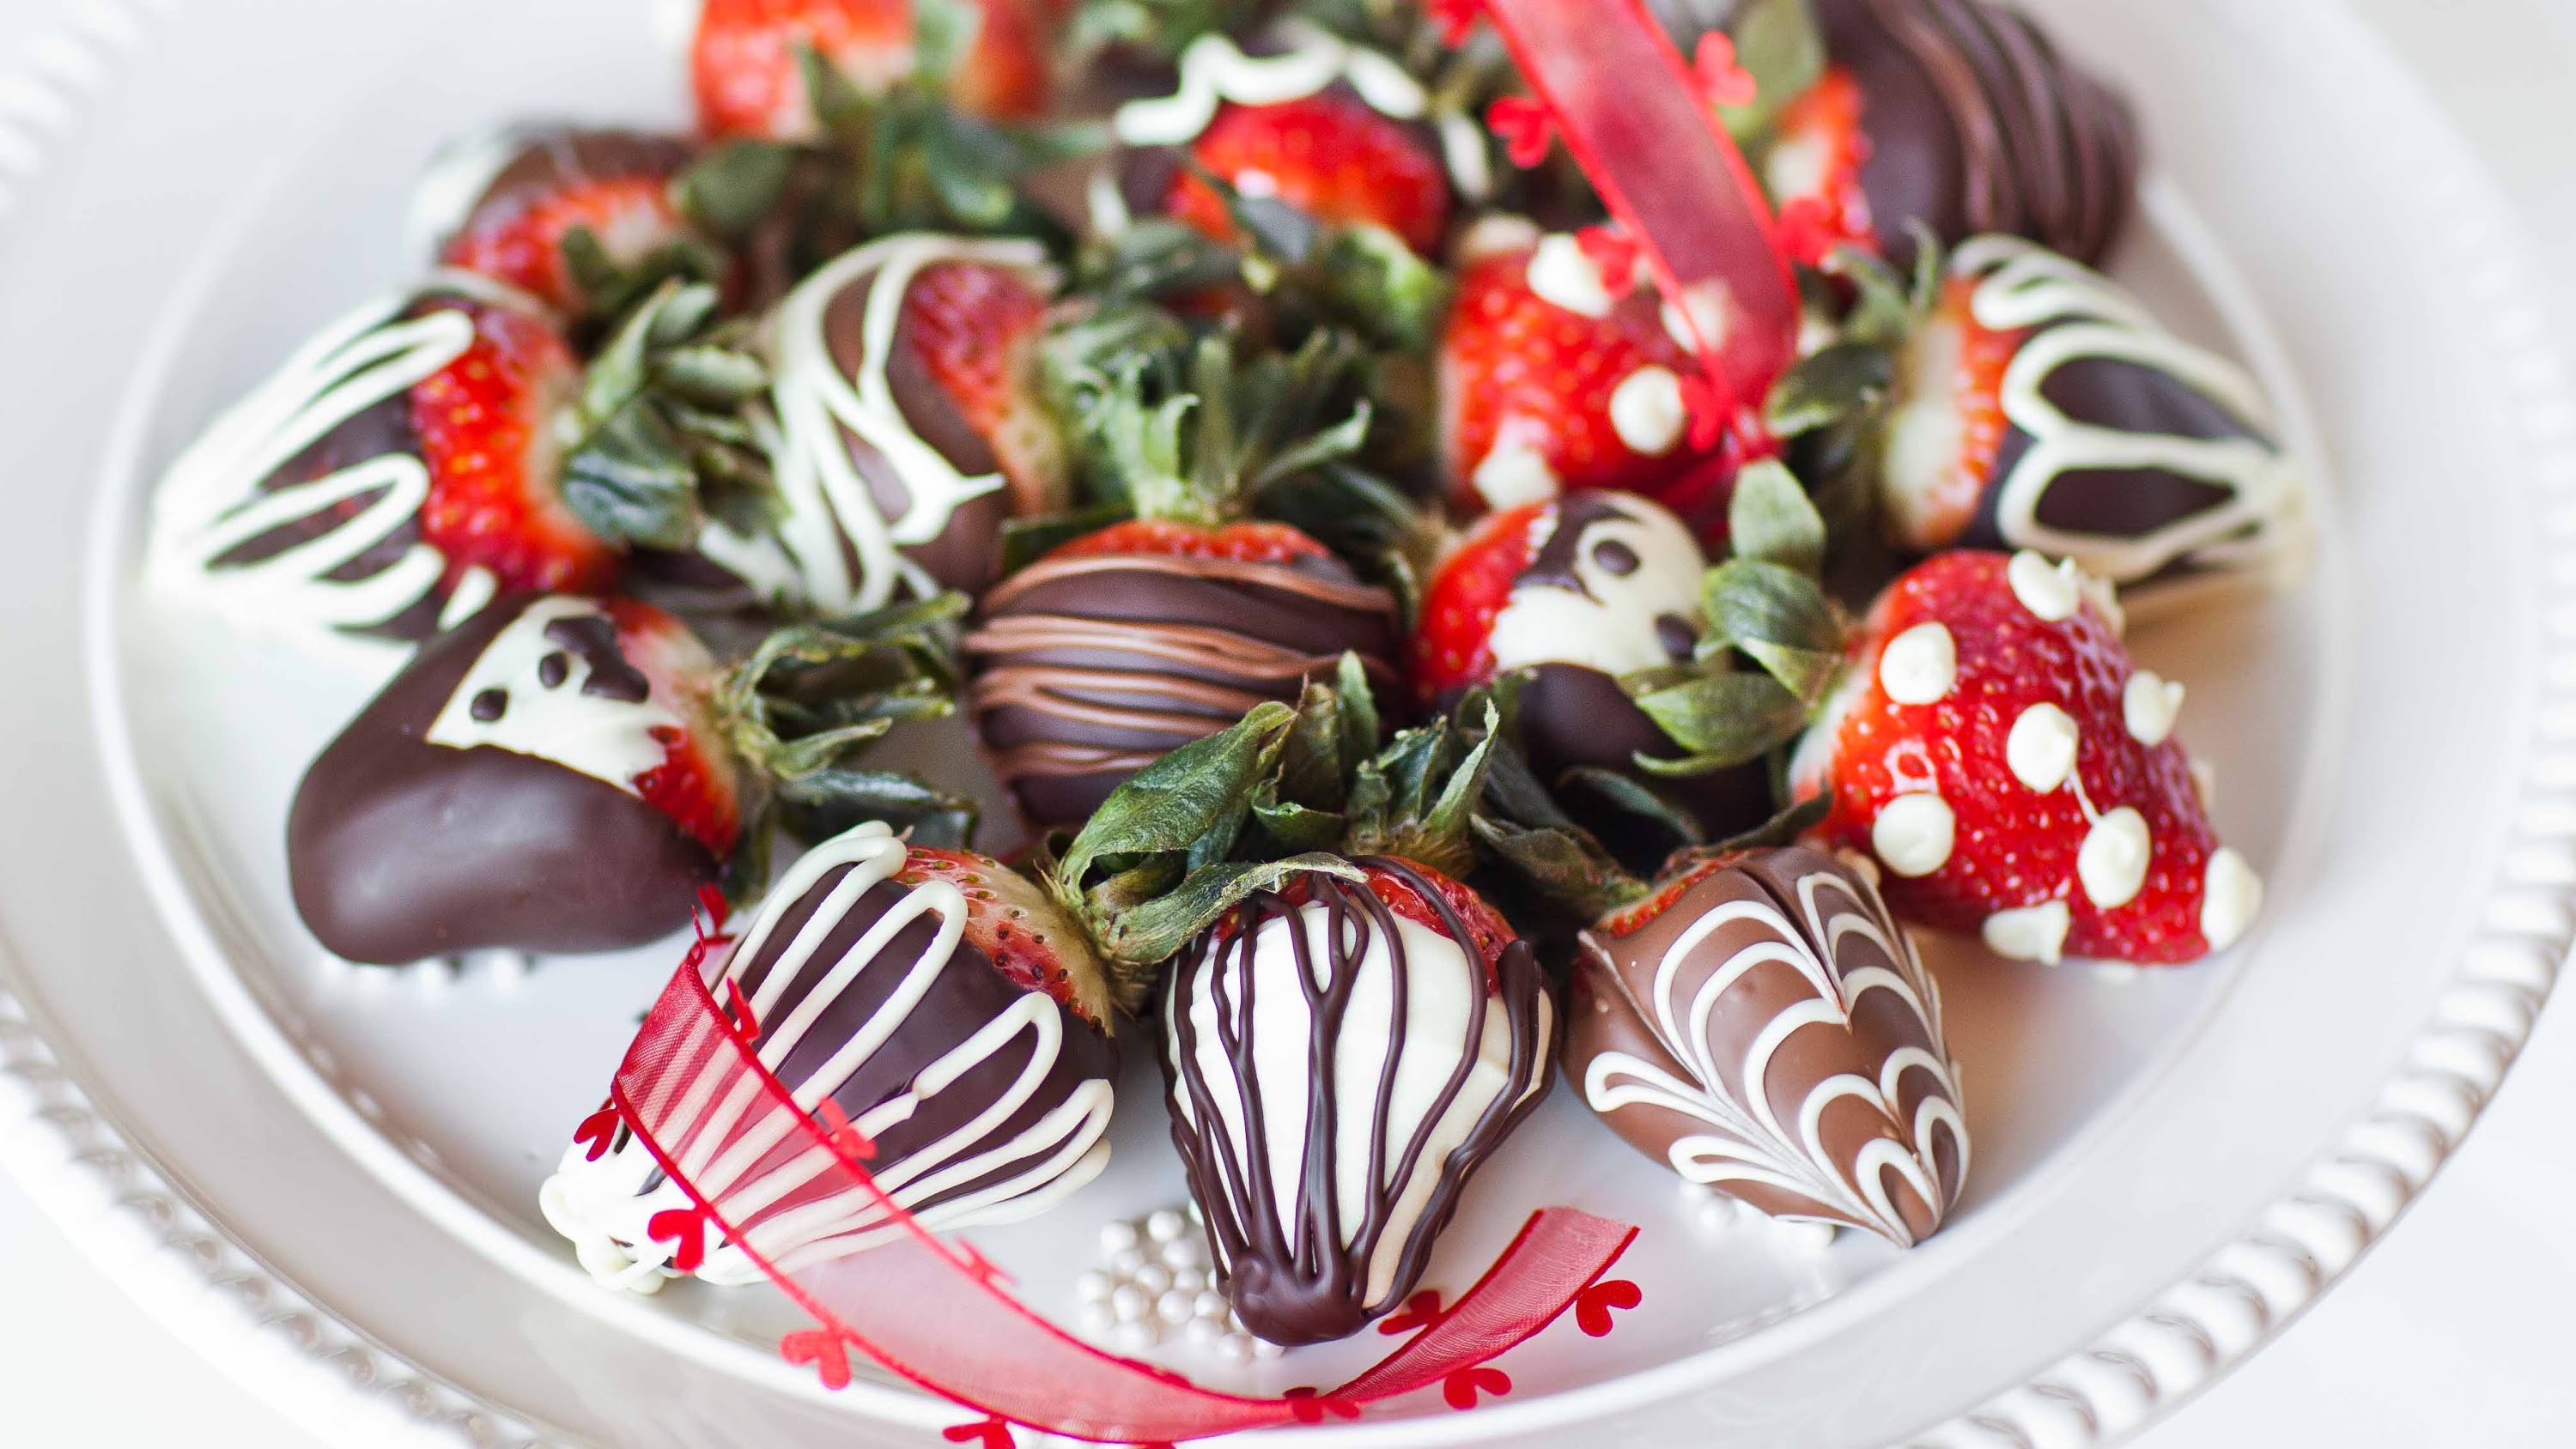 How to Make Chocolate Covered Strawberries - YouTube